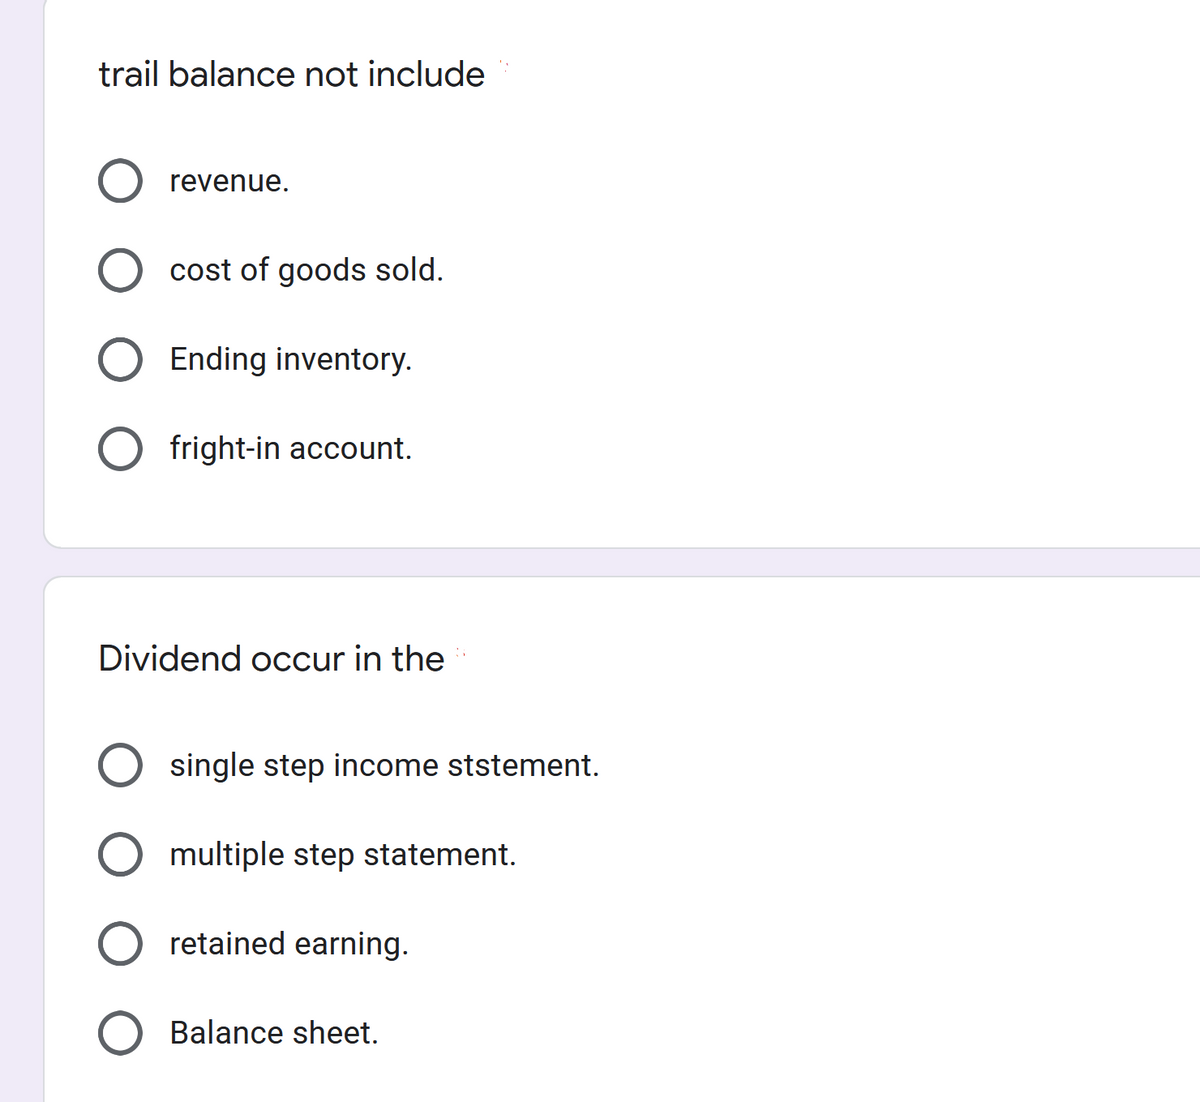 trail balance not include
O revenue.
O cost of goods sold.
O Ending inventory.
O fright-in account.
Dividend occur in the
O single step income ststement.
multiple step statement.
O retained earning.
Balance sheet.
